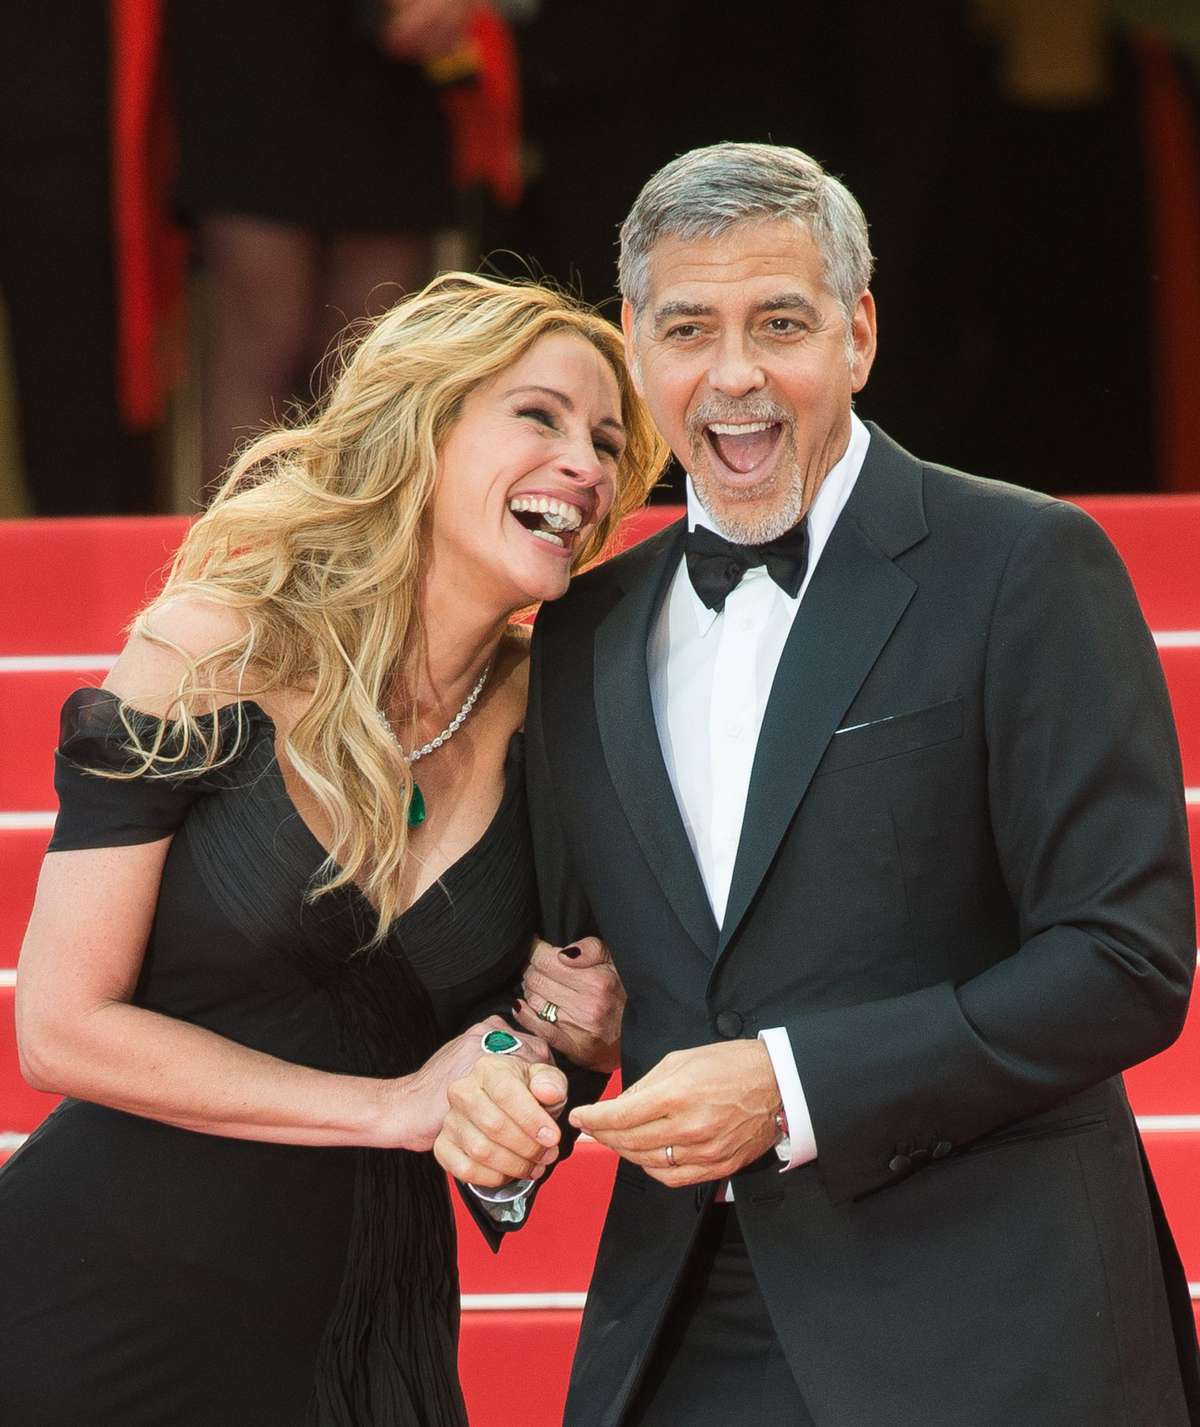 Julia Roberts and George Clooney lead